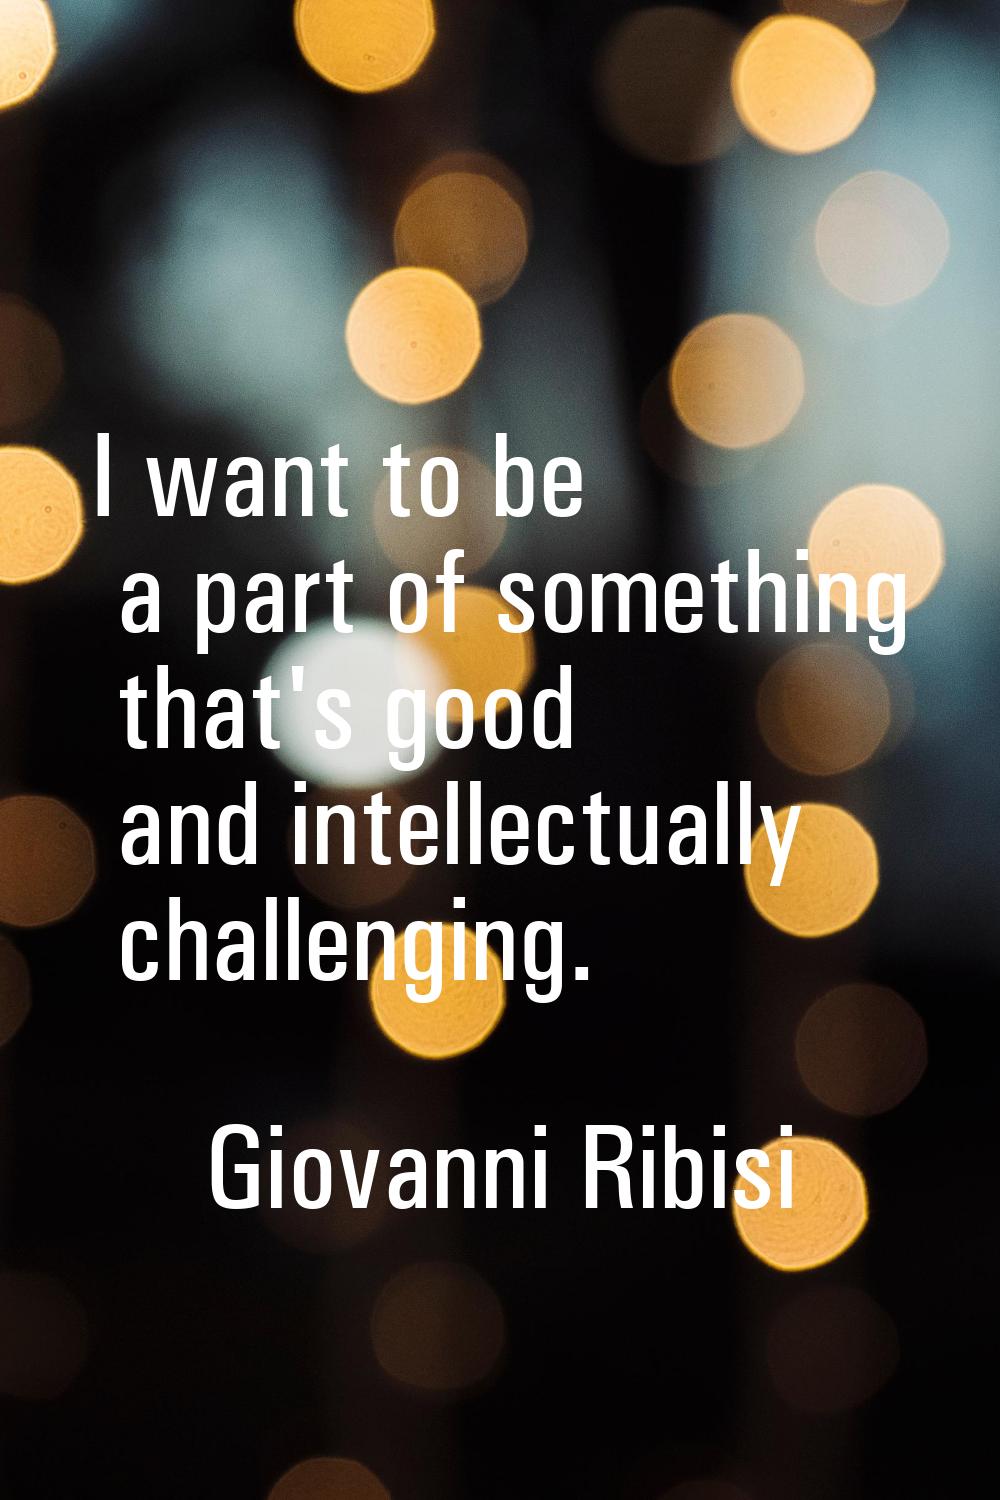 I want to be a part of something that's good and intellectually challenging.